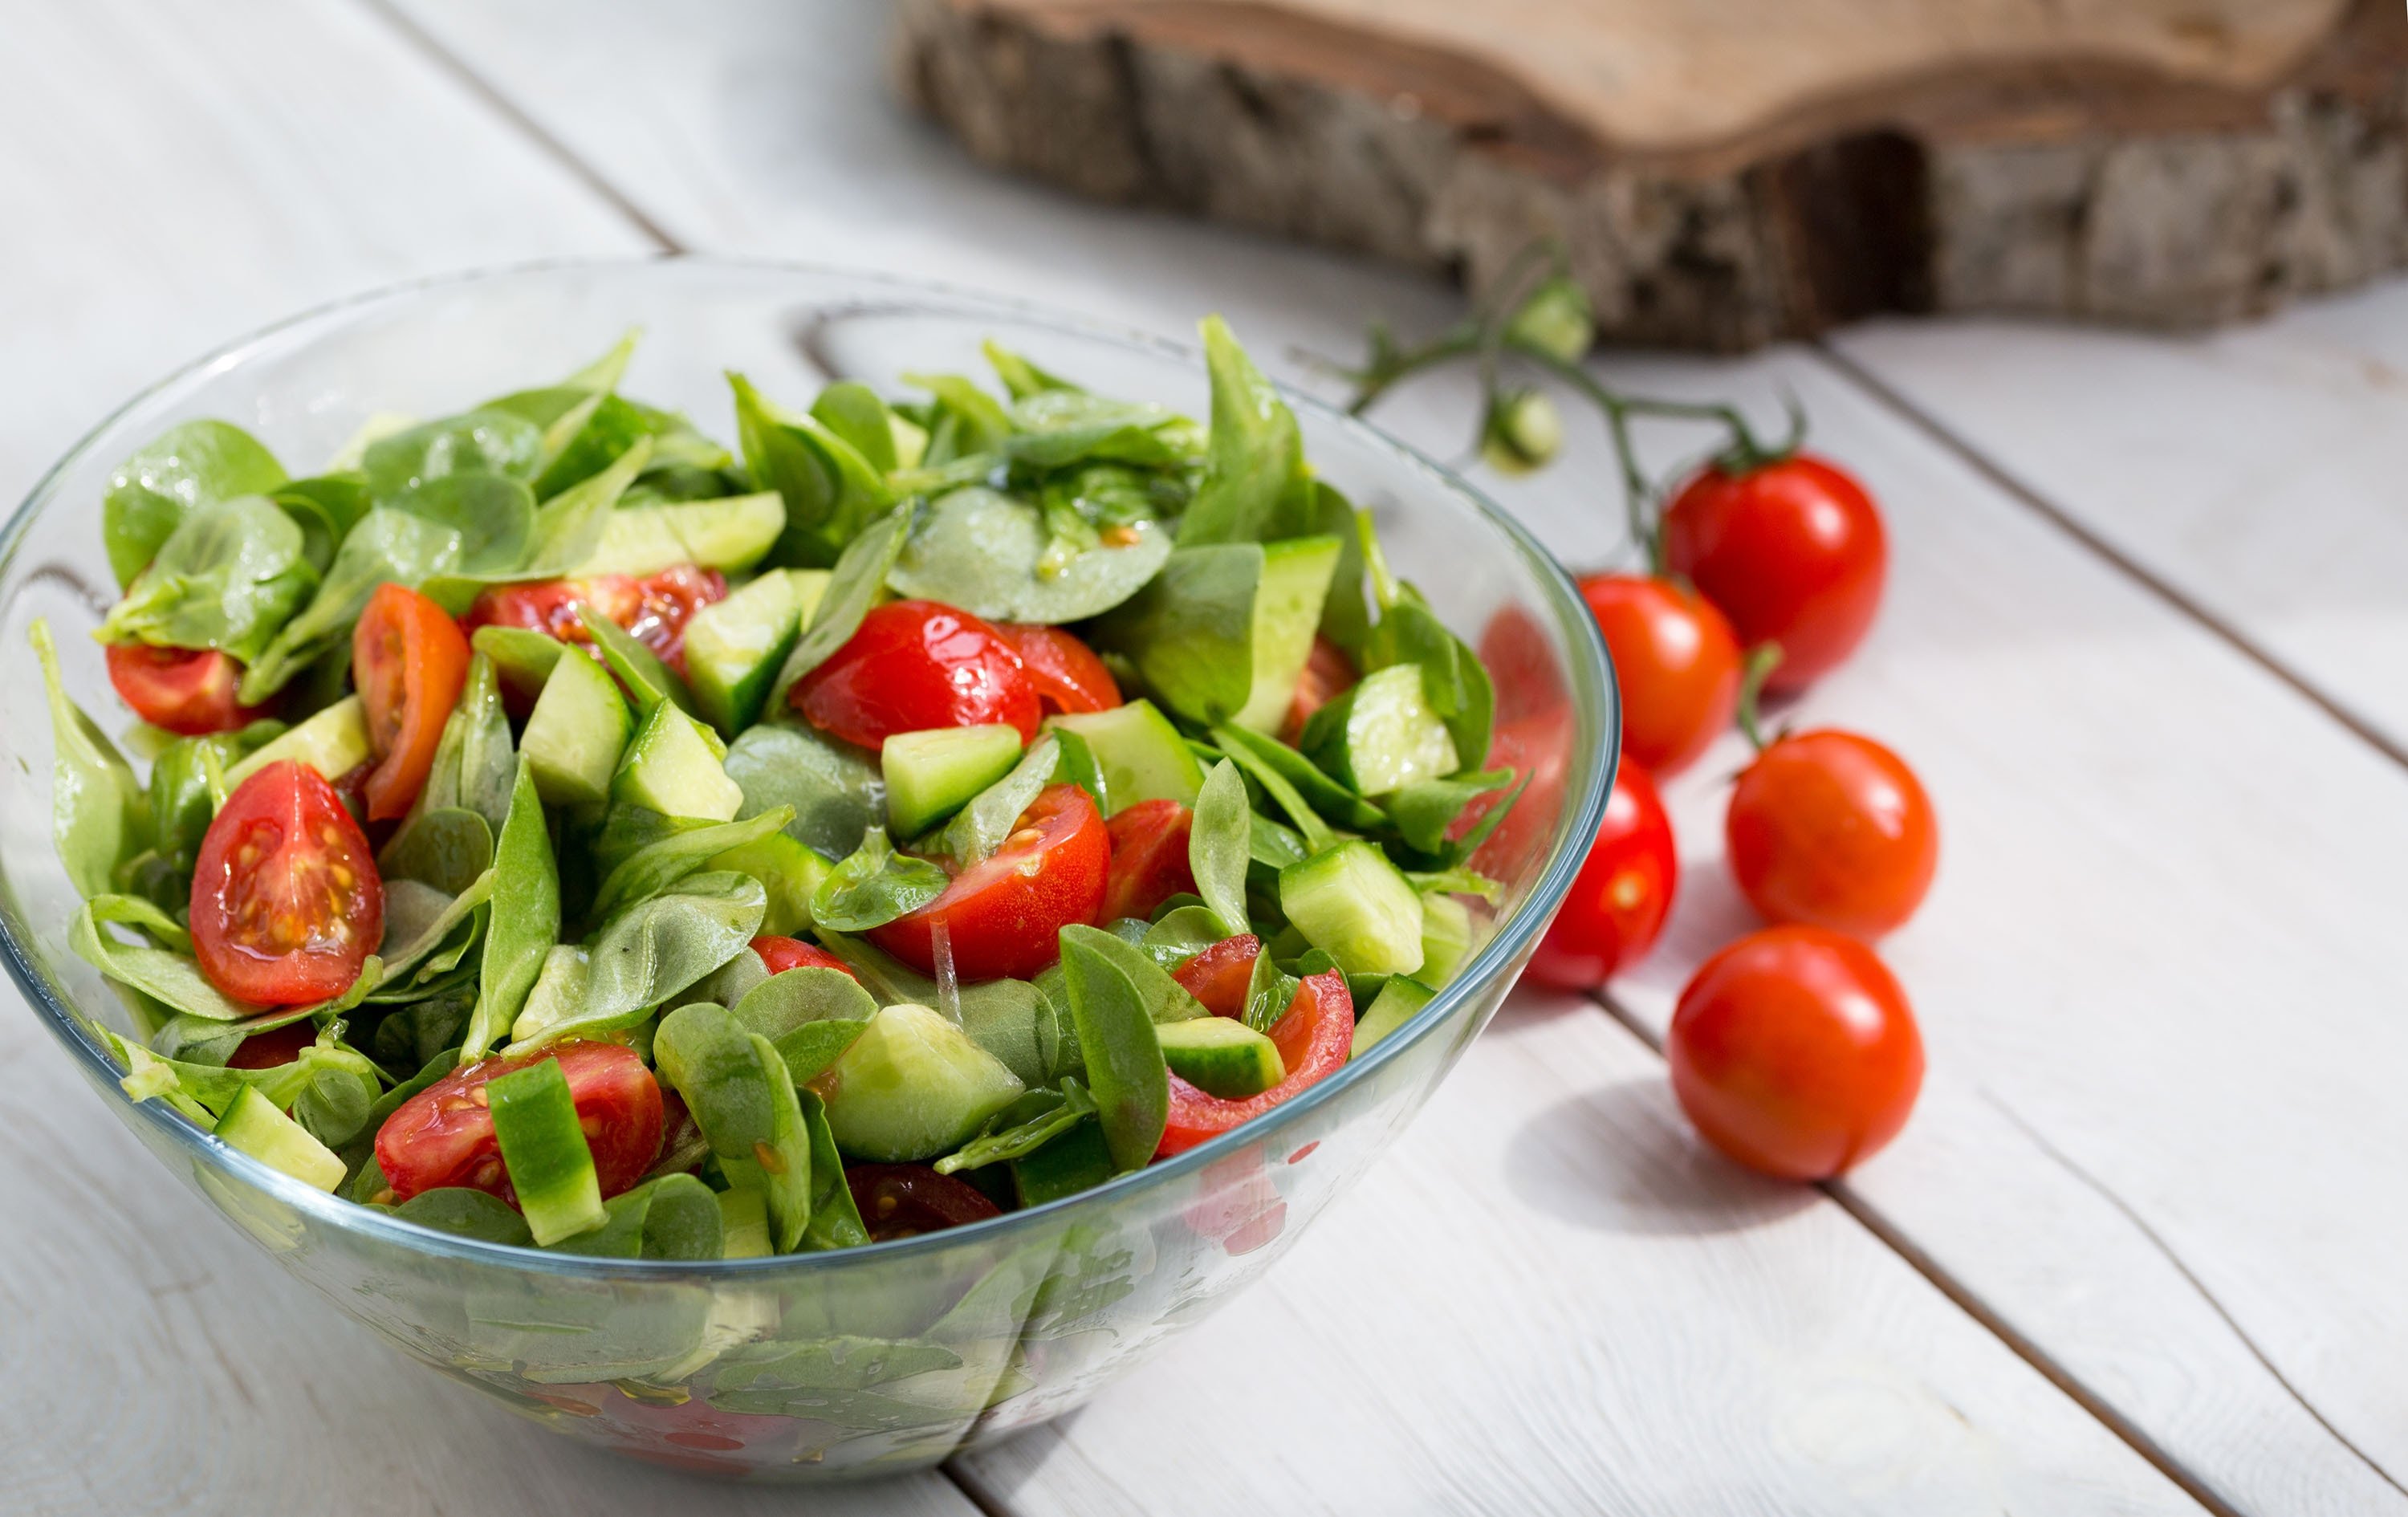 Purslane salad with tomatoes and cucumbers. (Shutterstock Photo)